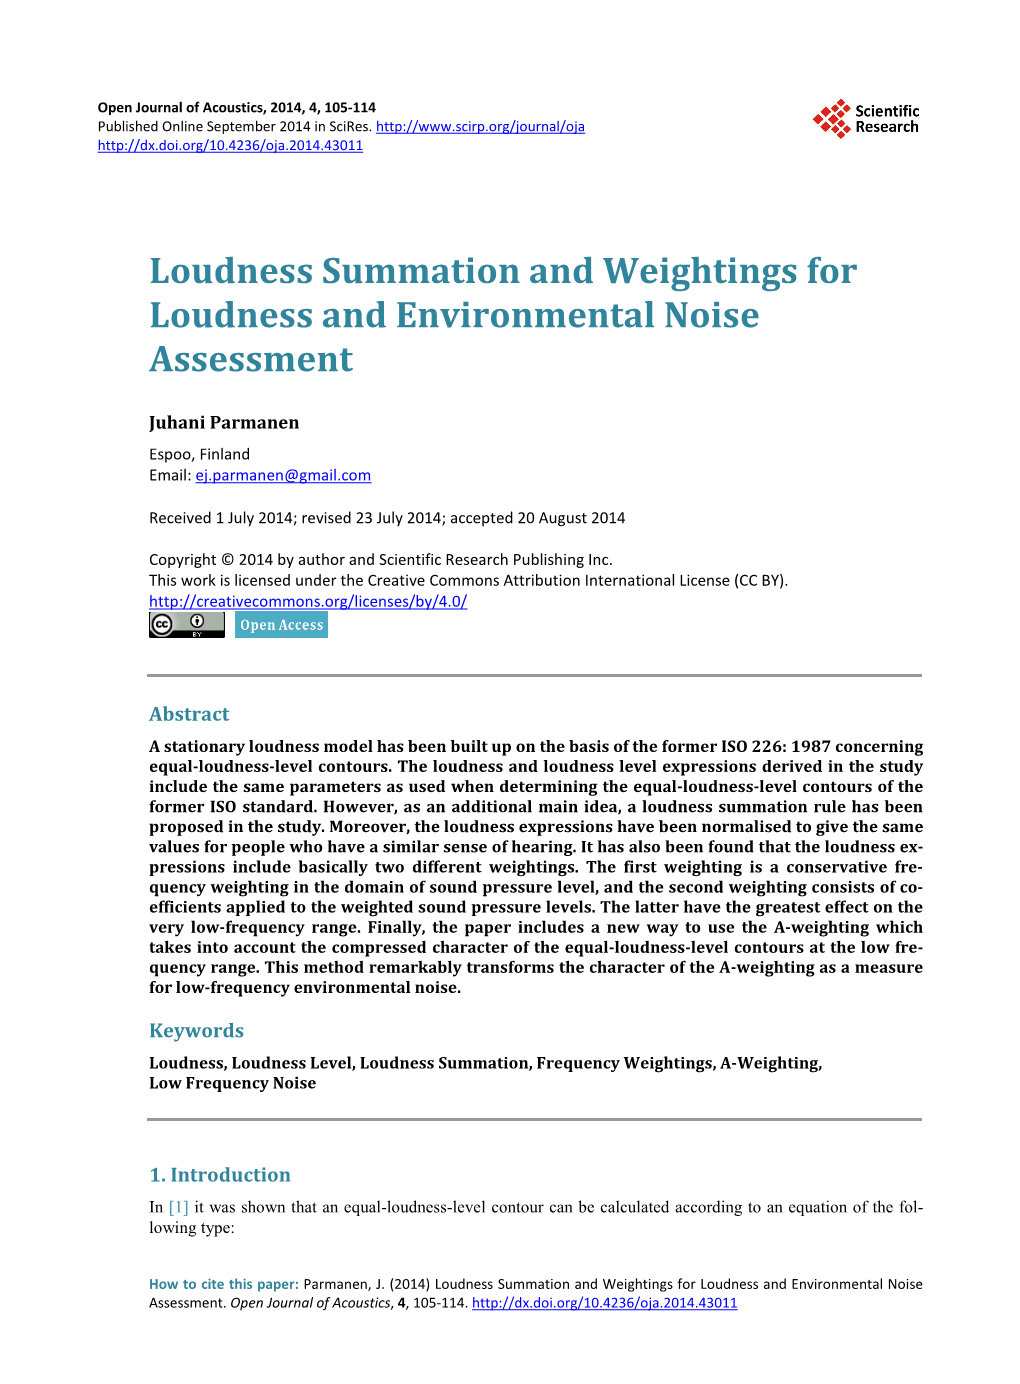 Loudness Summation and Weightings for Loudness and Environmental Noise Assessment